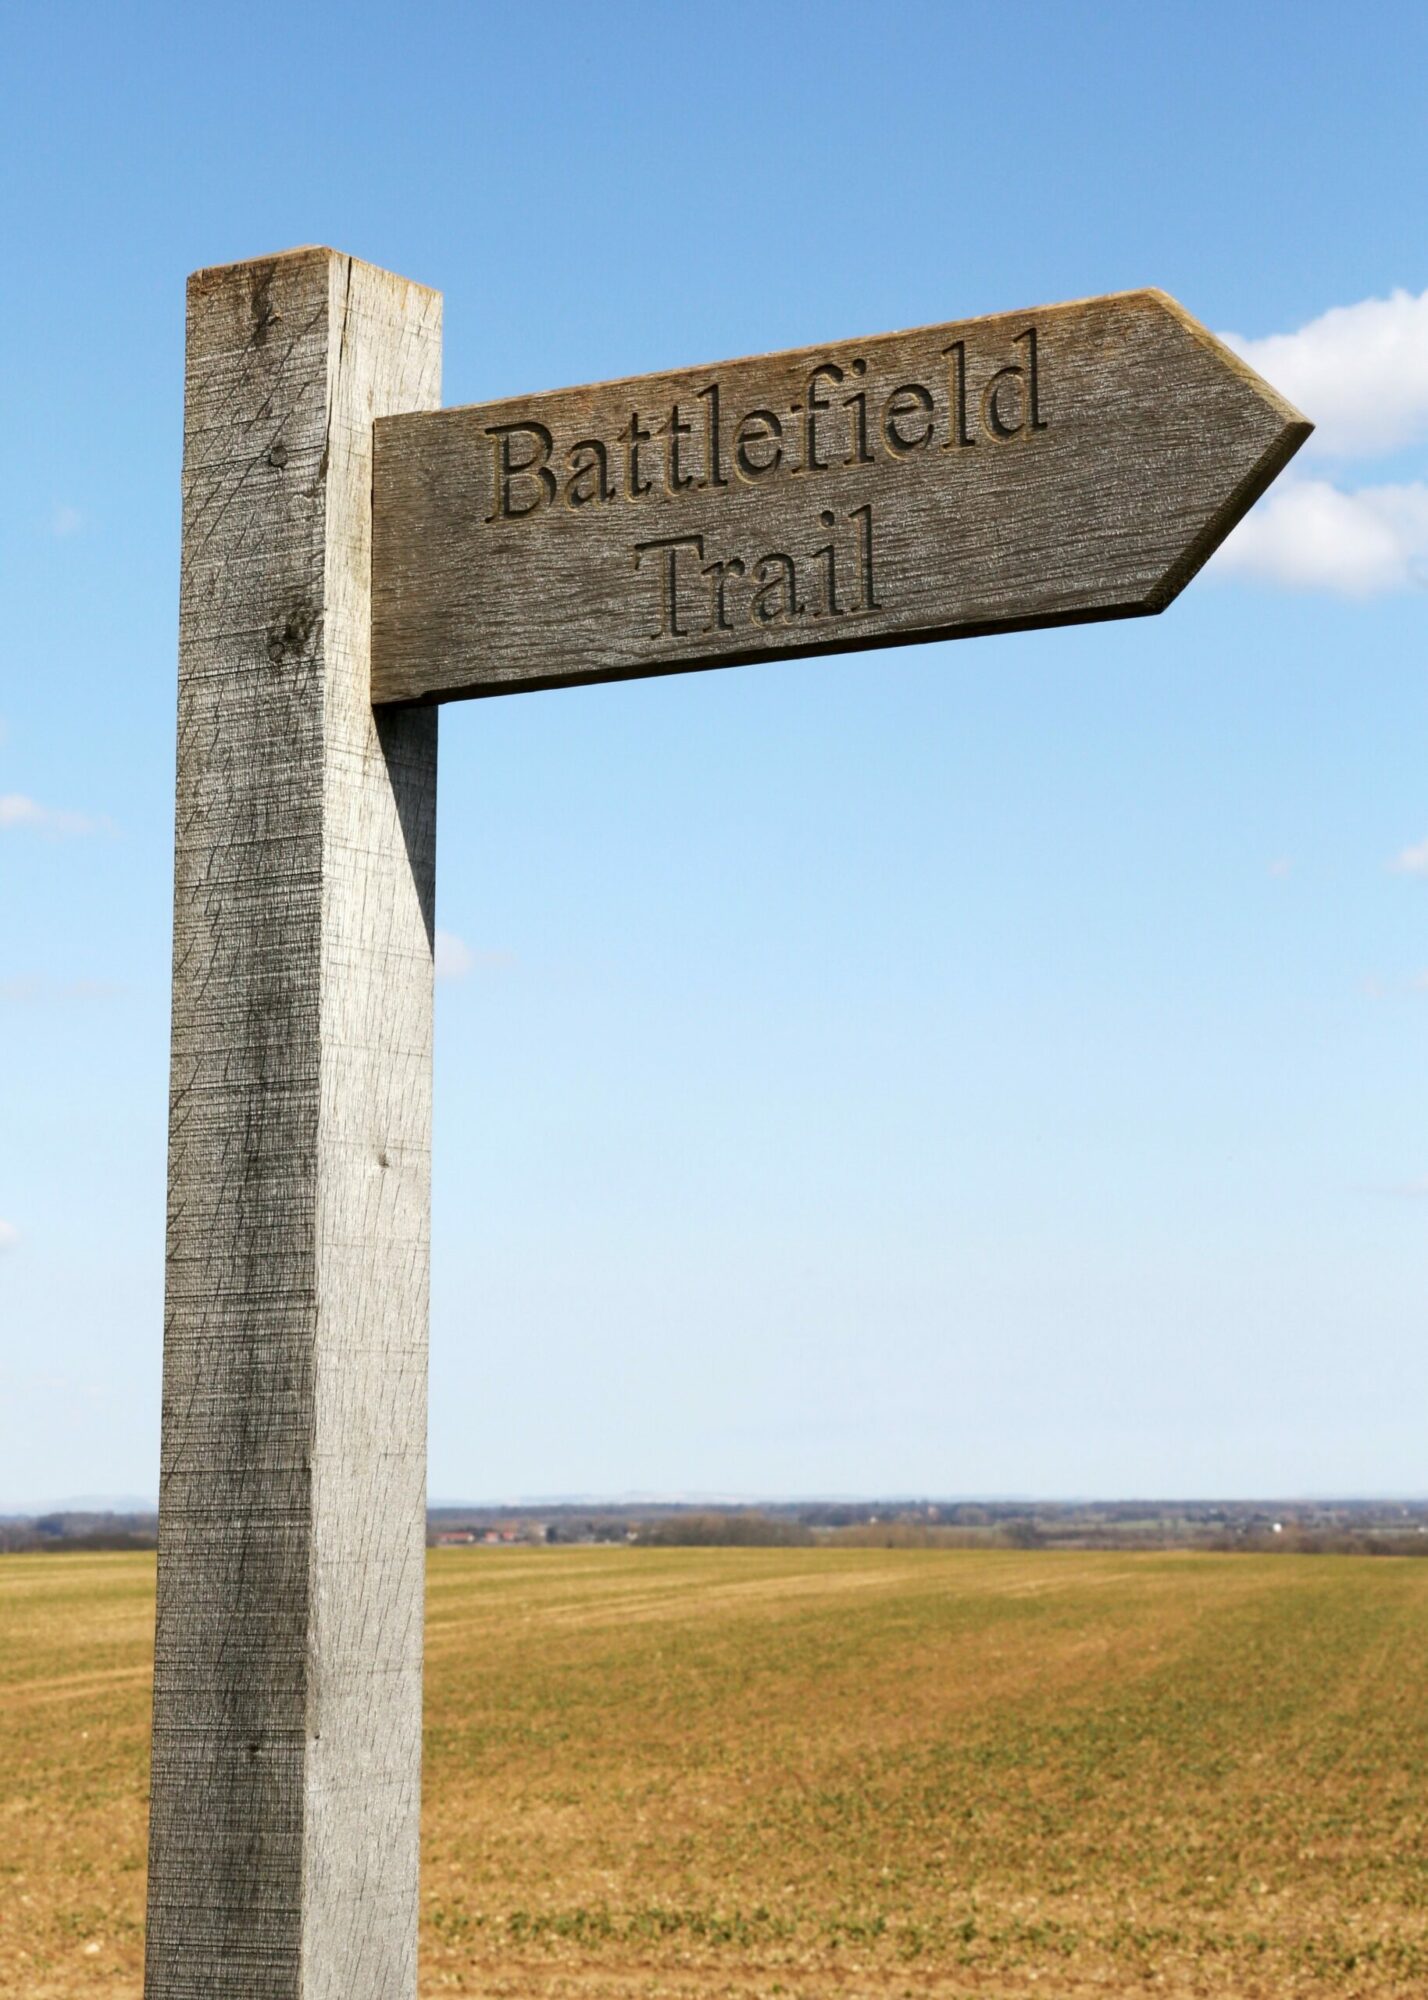 Image name Towton Battlefield Rush scaled the 1 image from the post Towton Battlefield Trail in Yorkshire.com.